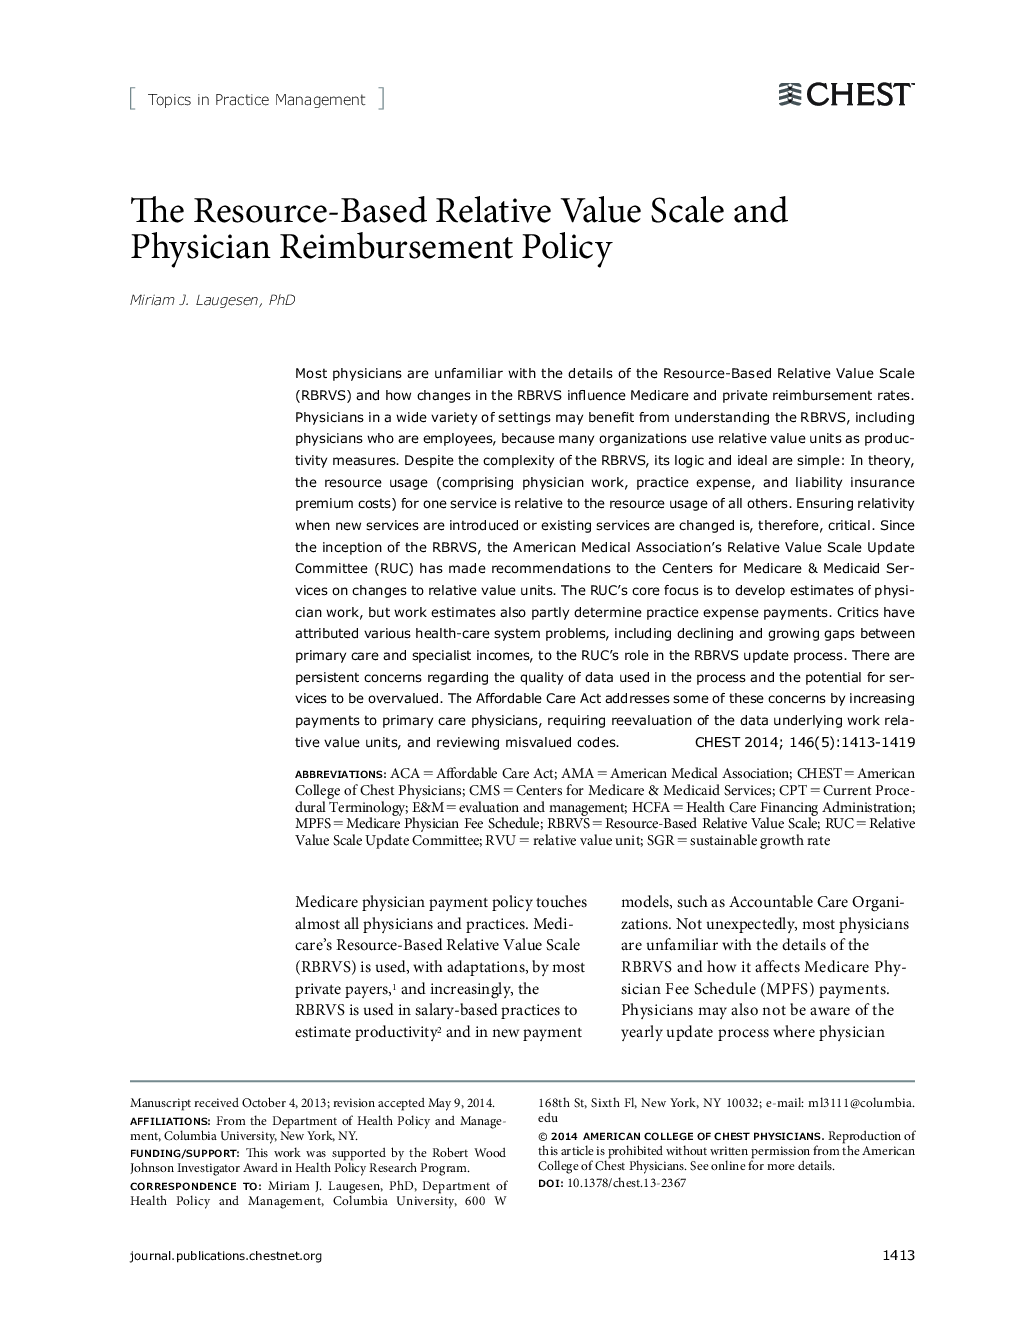 The Resource-Based Relative Value Scale and Physician Reimbursement Policy